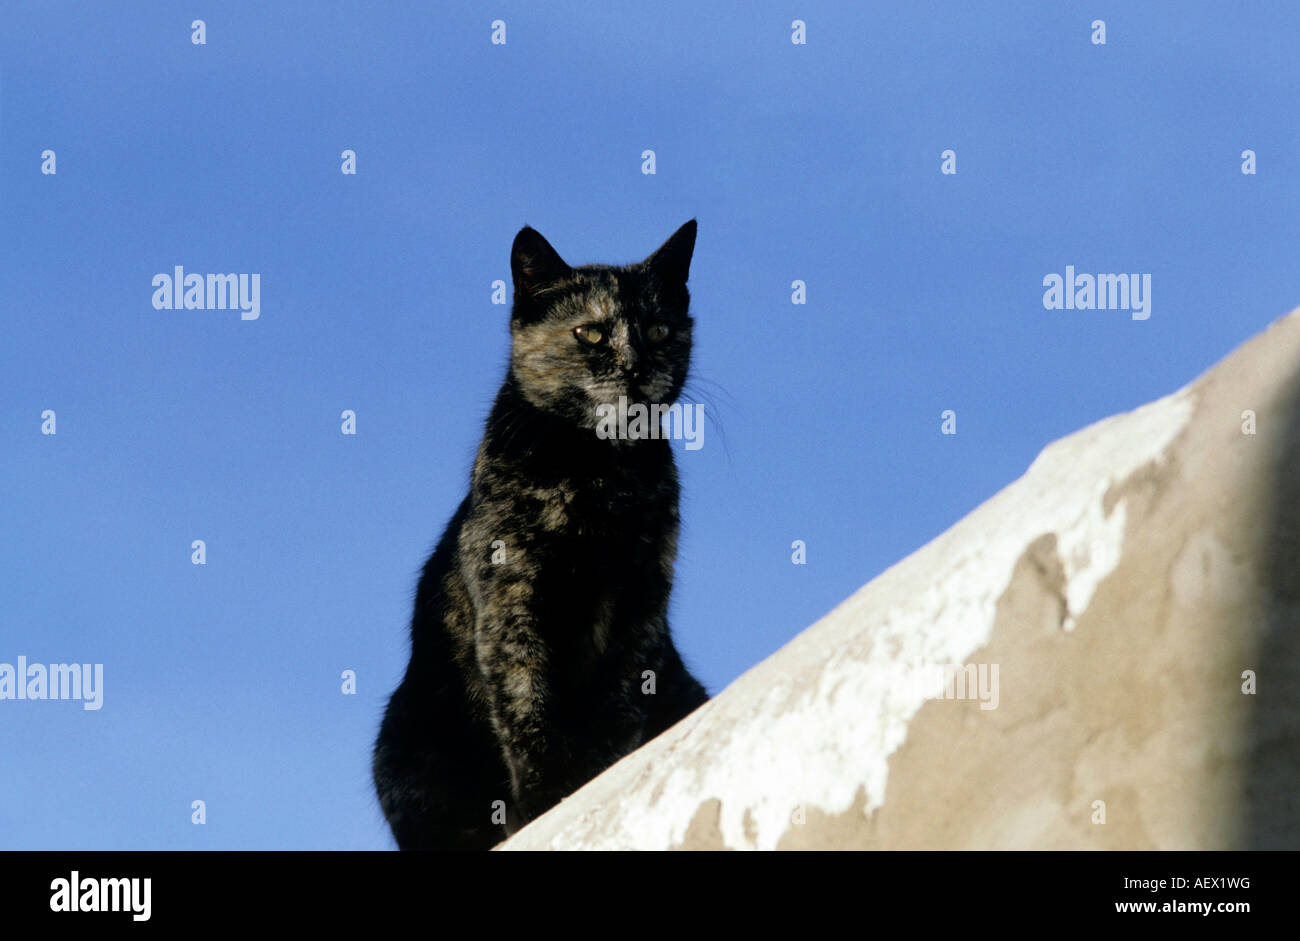 Black cat on a wall Stock Photo